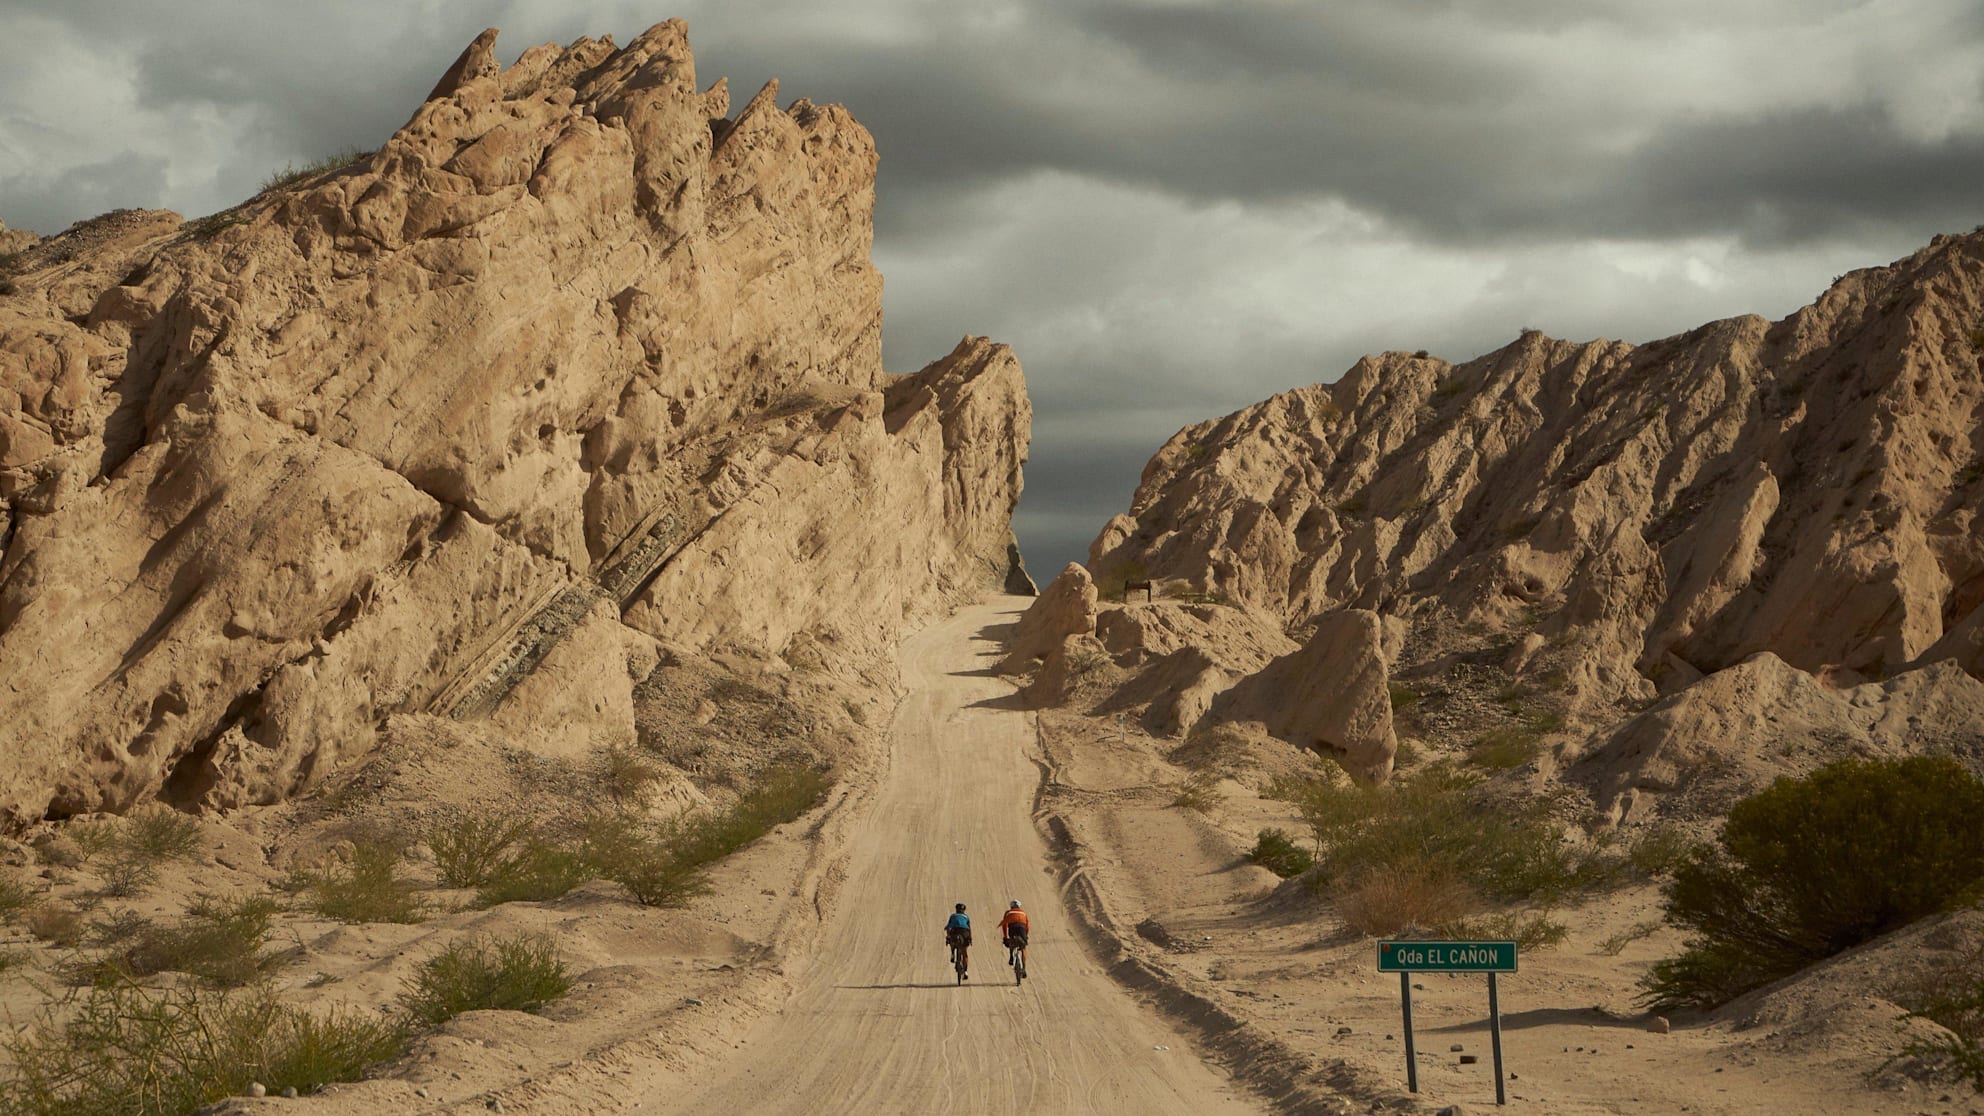 In January, Rapha photographer and filmmaker George Marshall travelled to northern Argentina with long-distance riders Jesse Carlsson, Sarah Hammond and Neil Phillips.